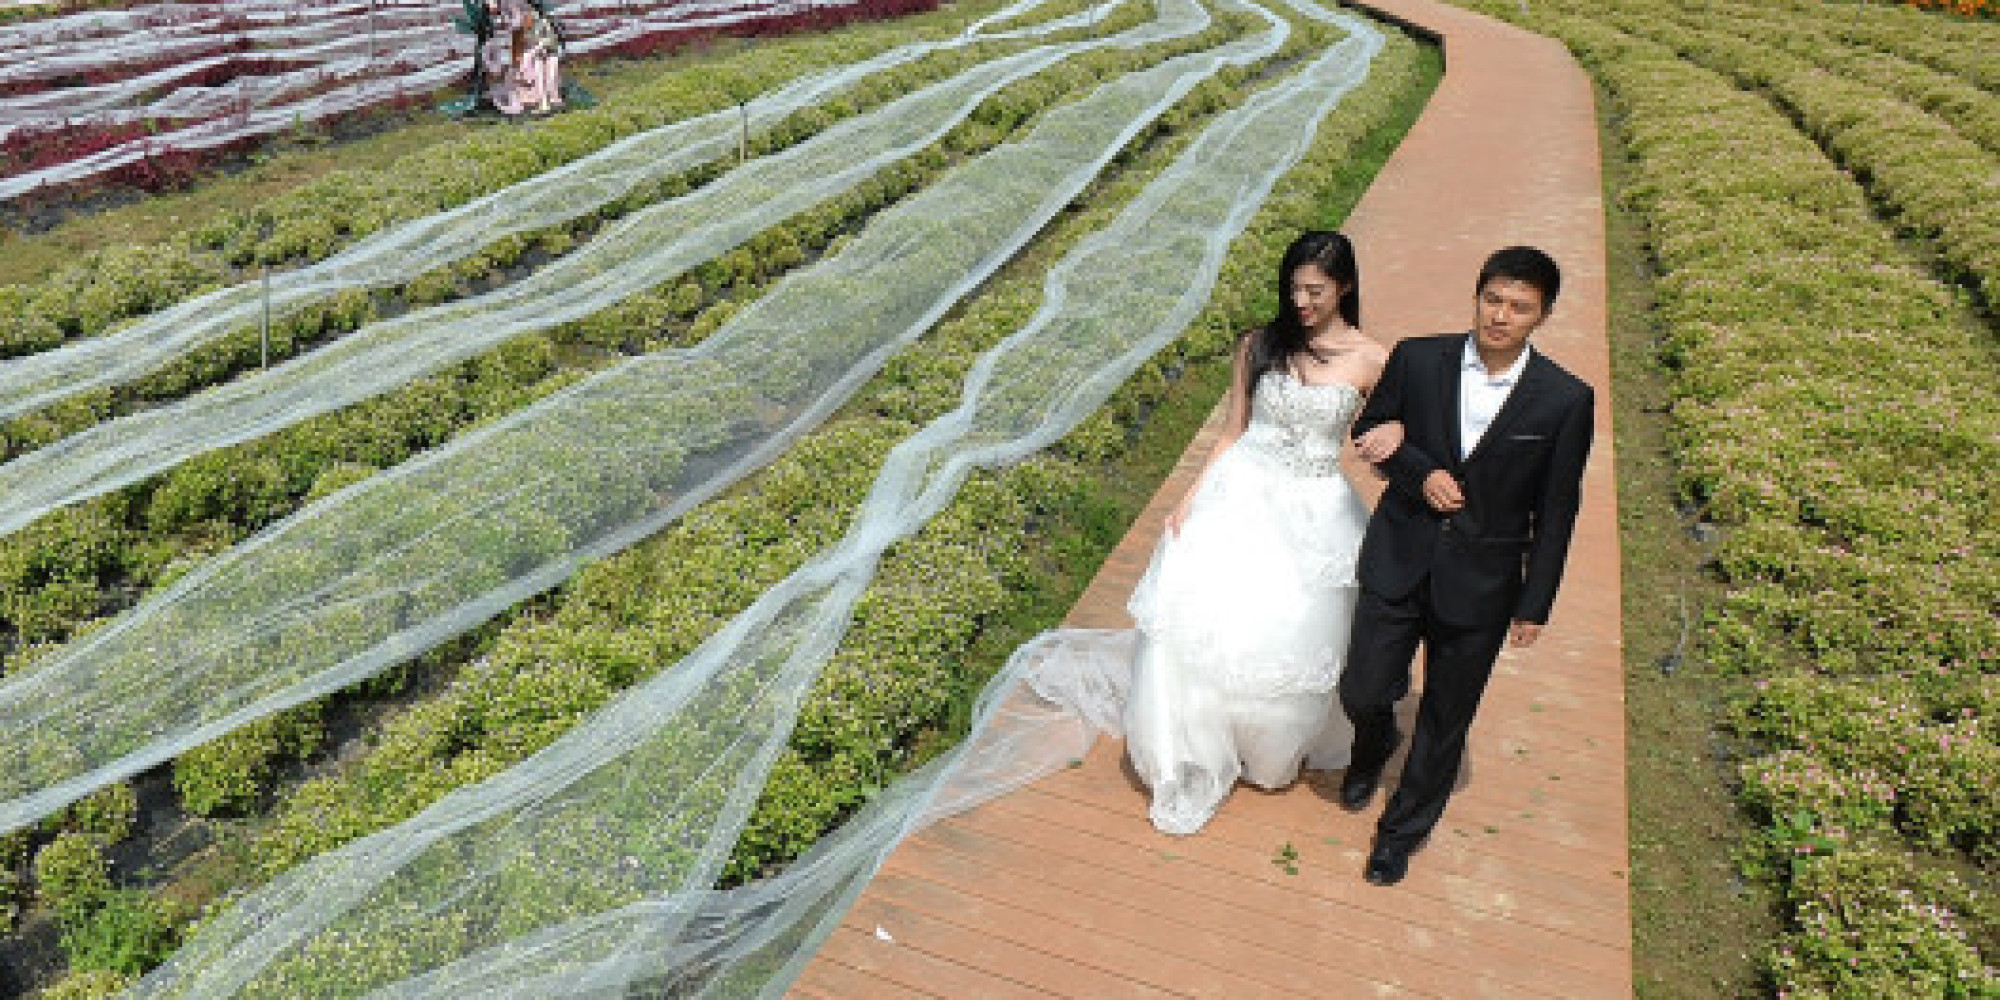 Is this the worlds biggest wedding gown? An 800lb bride 